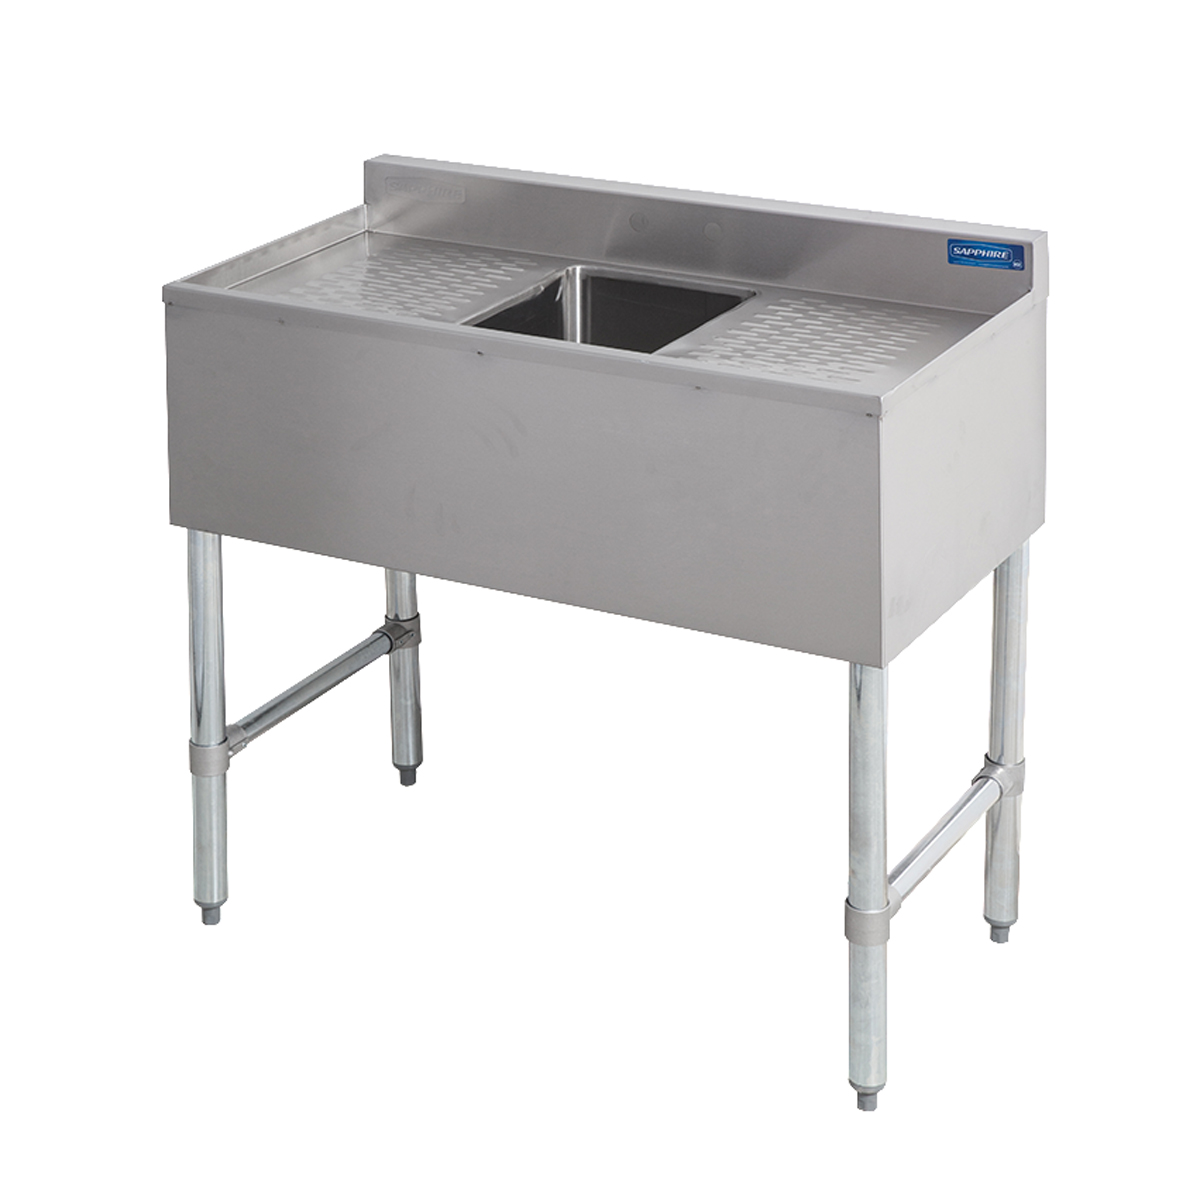 Sapphire SMBS-1D One Compartment Underbar Sink Unit with Two Drainboards